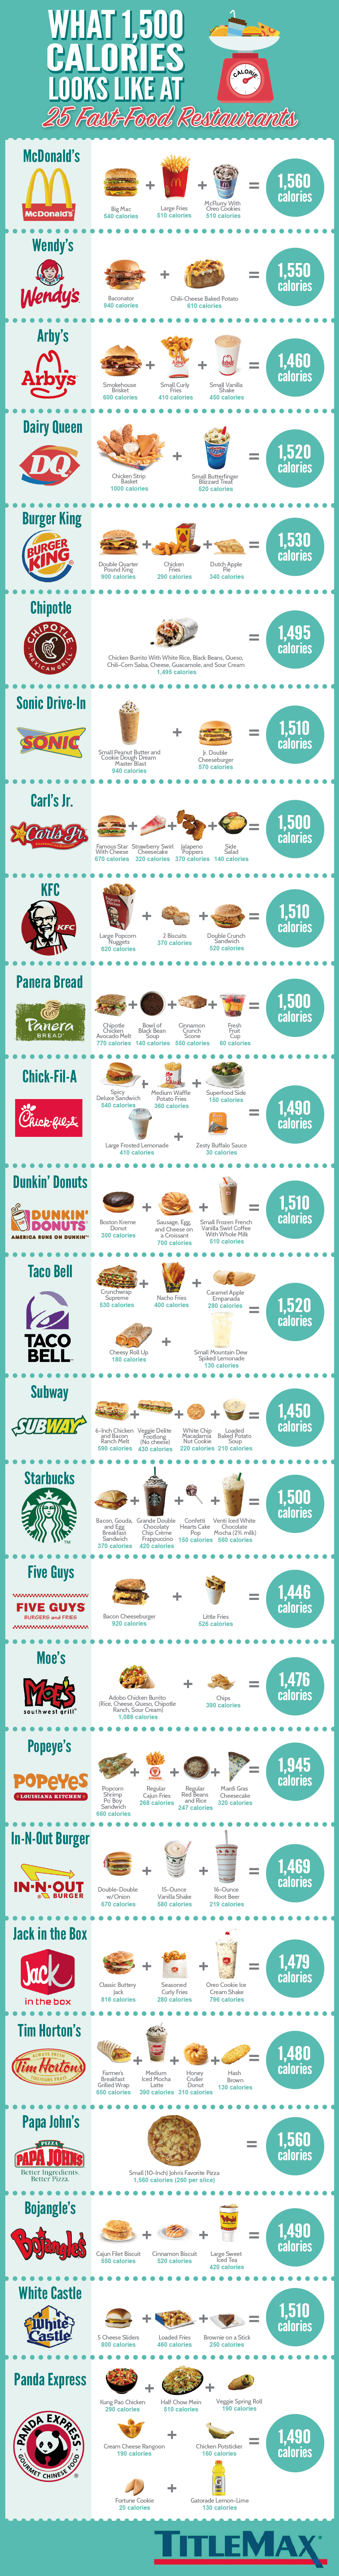 What 1500 Calories Looks Like at 25 Fast Food Restaurants